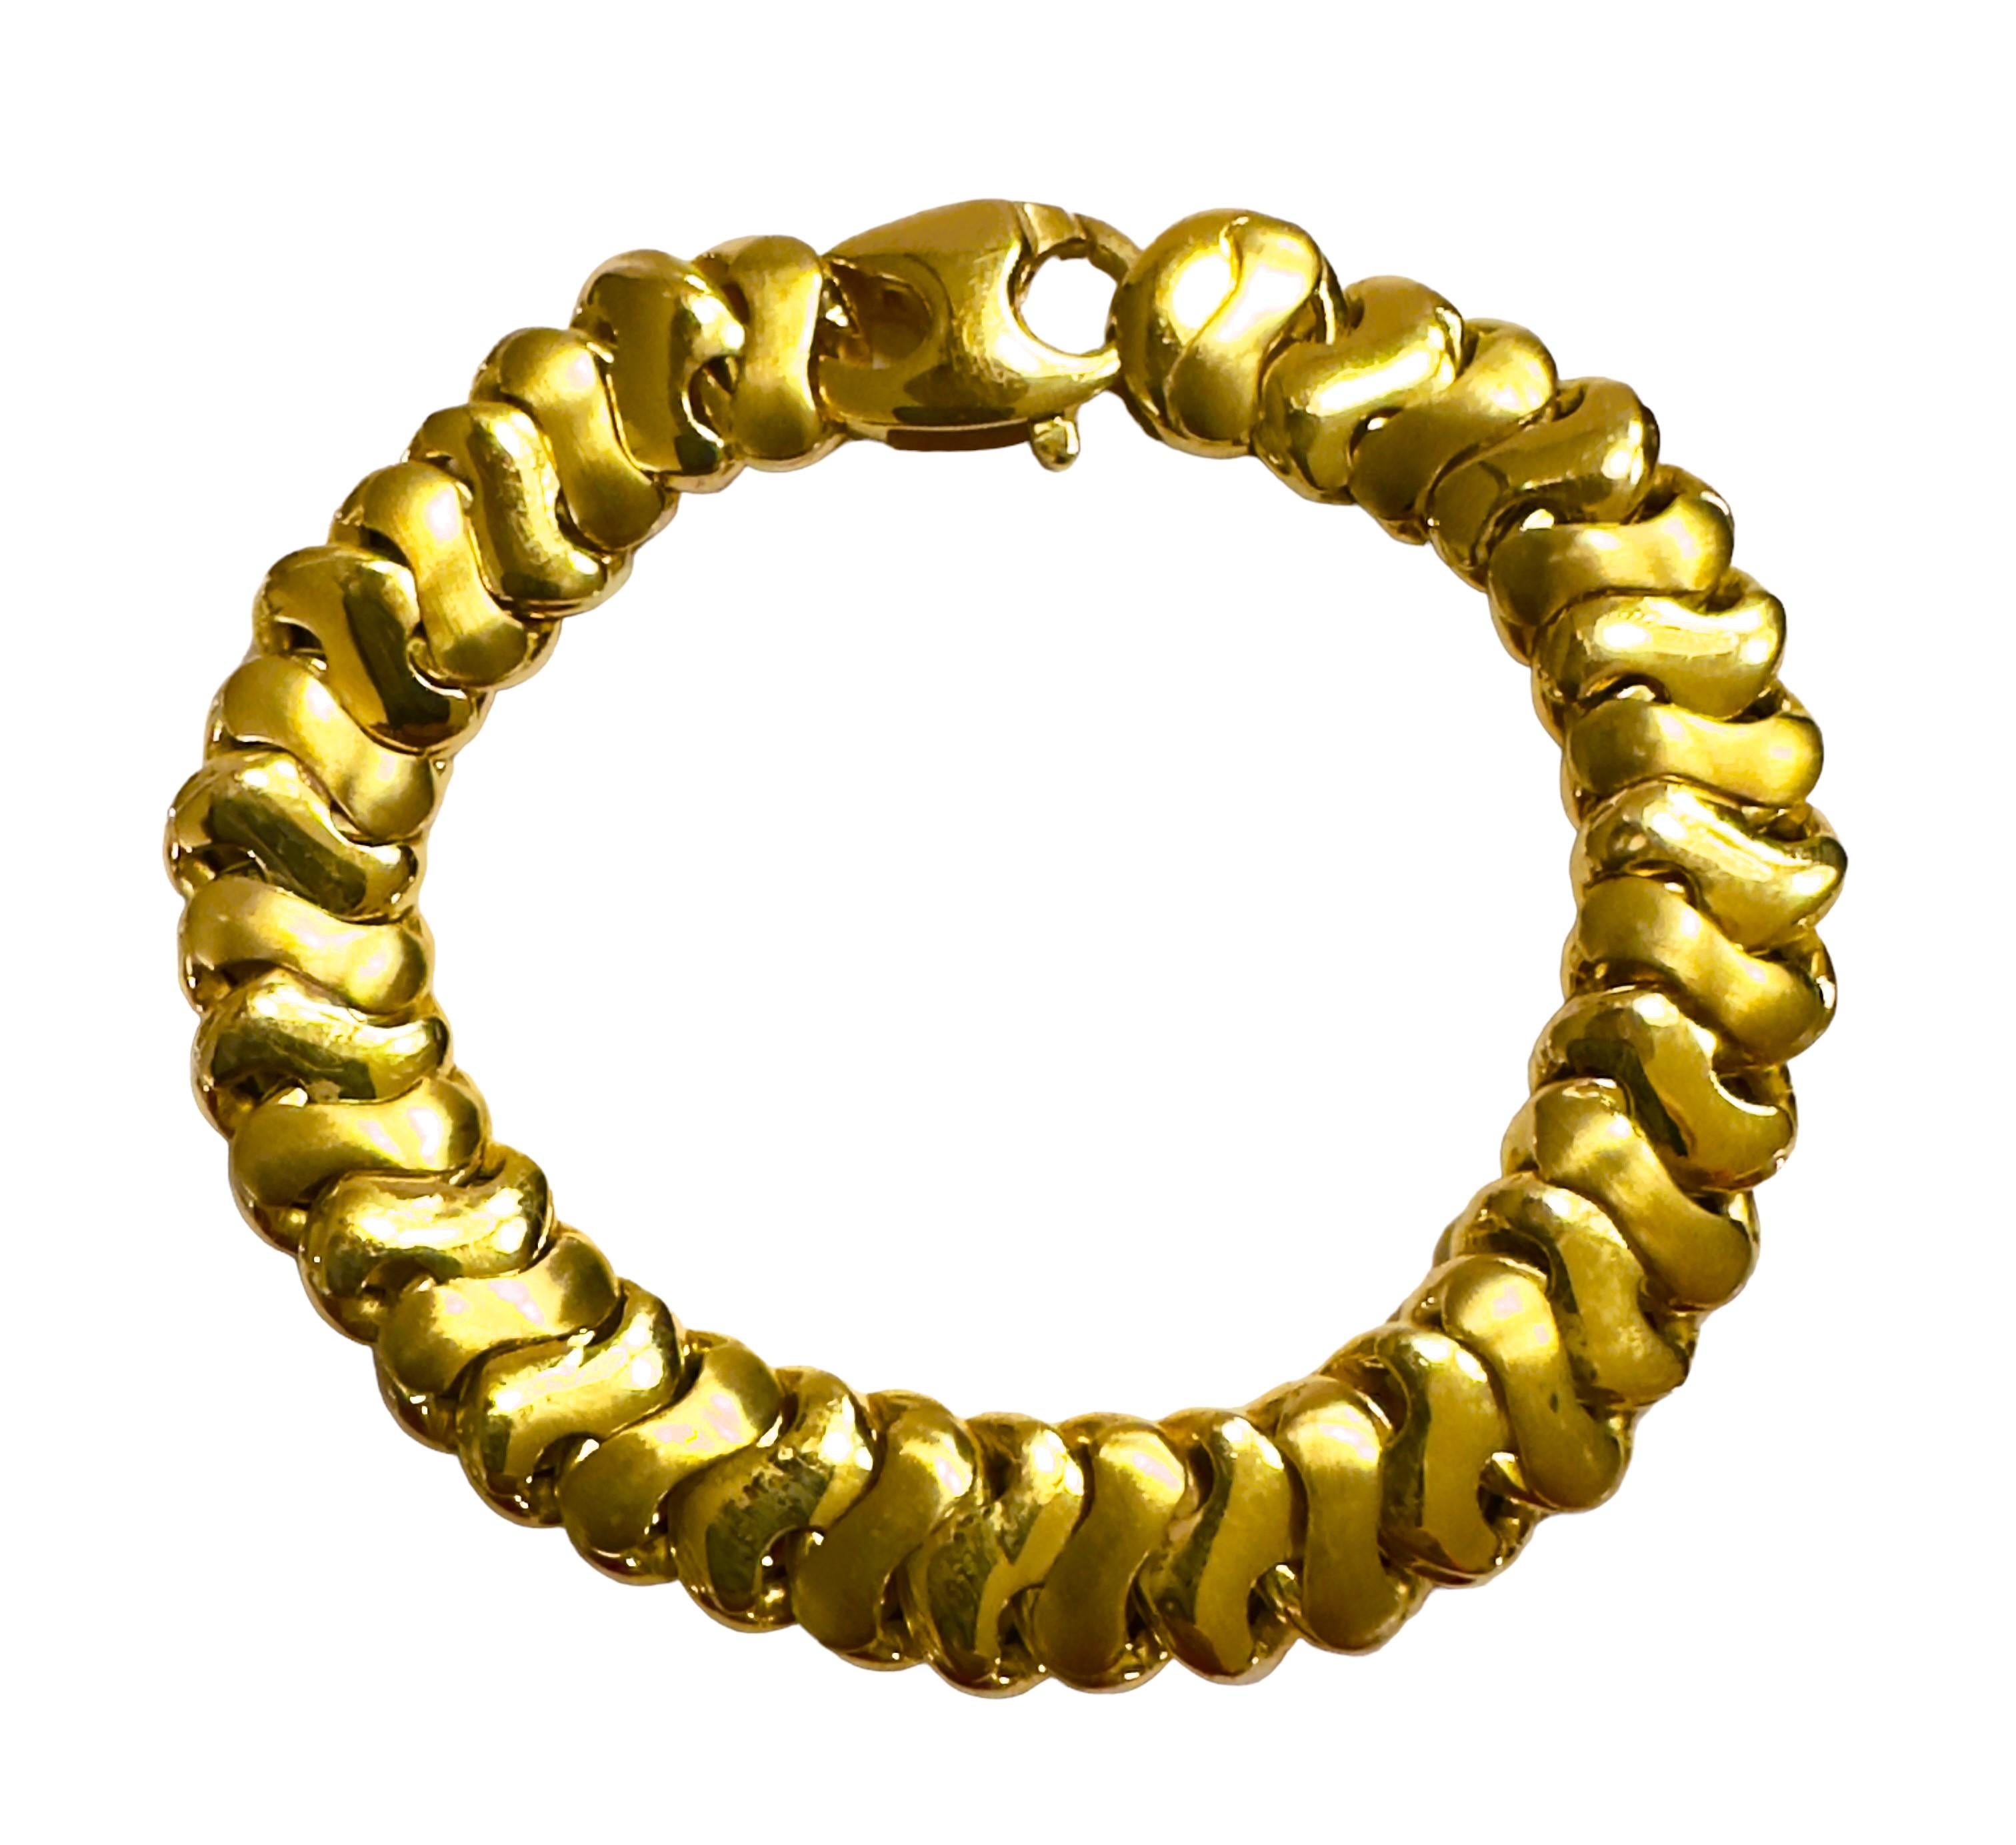 This bracelet is just so beautiful!!  It is a high polish necklace but on one side it is finish and on the other side there is Alternating High Polish links with Brush Gold links.   It looks great either way.  It feels just smooth and silky on your